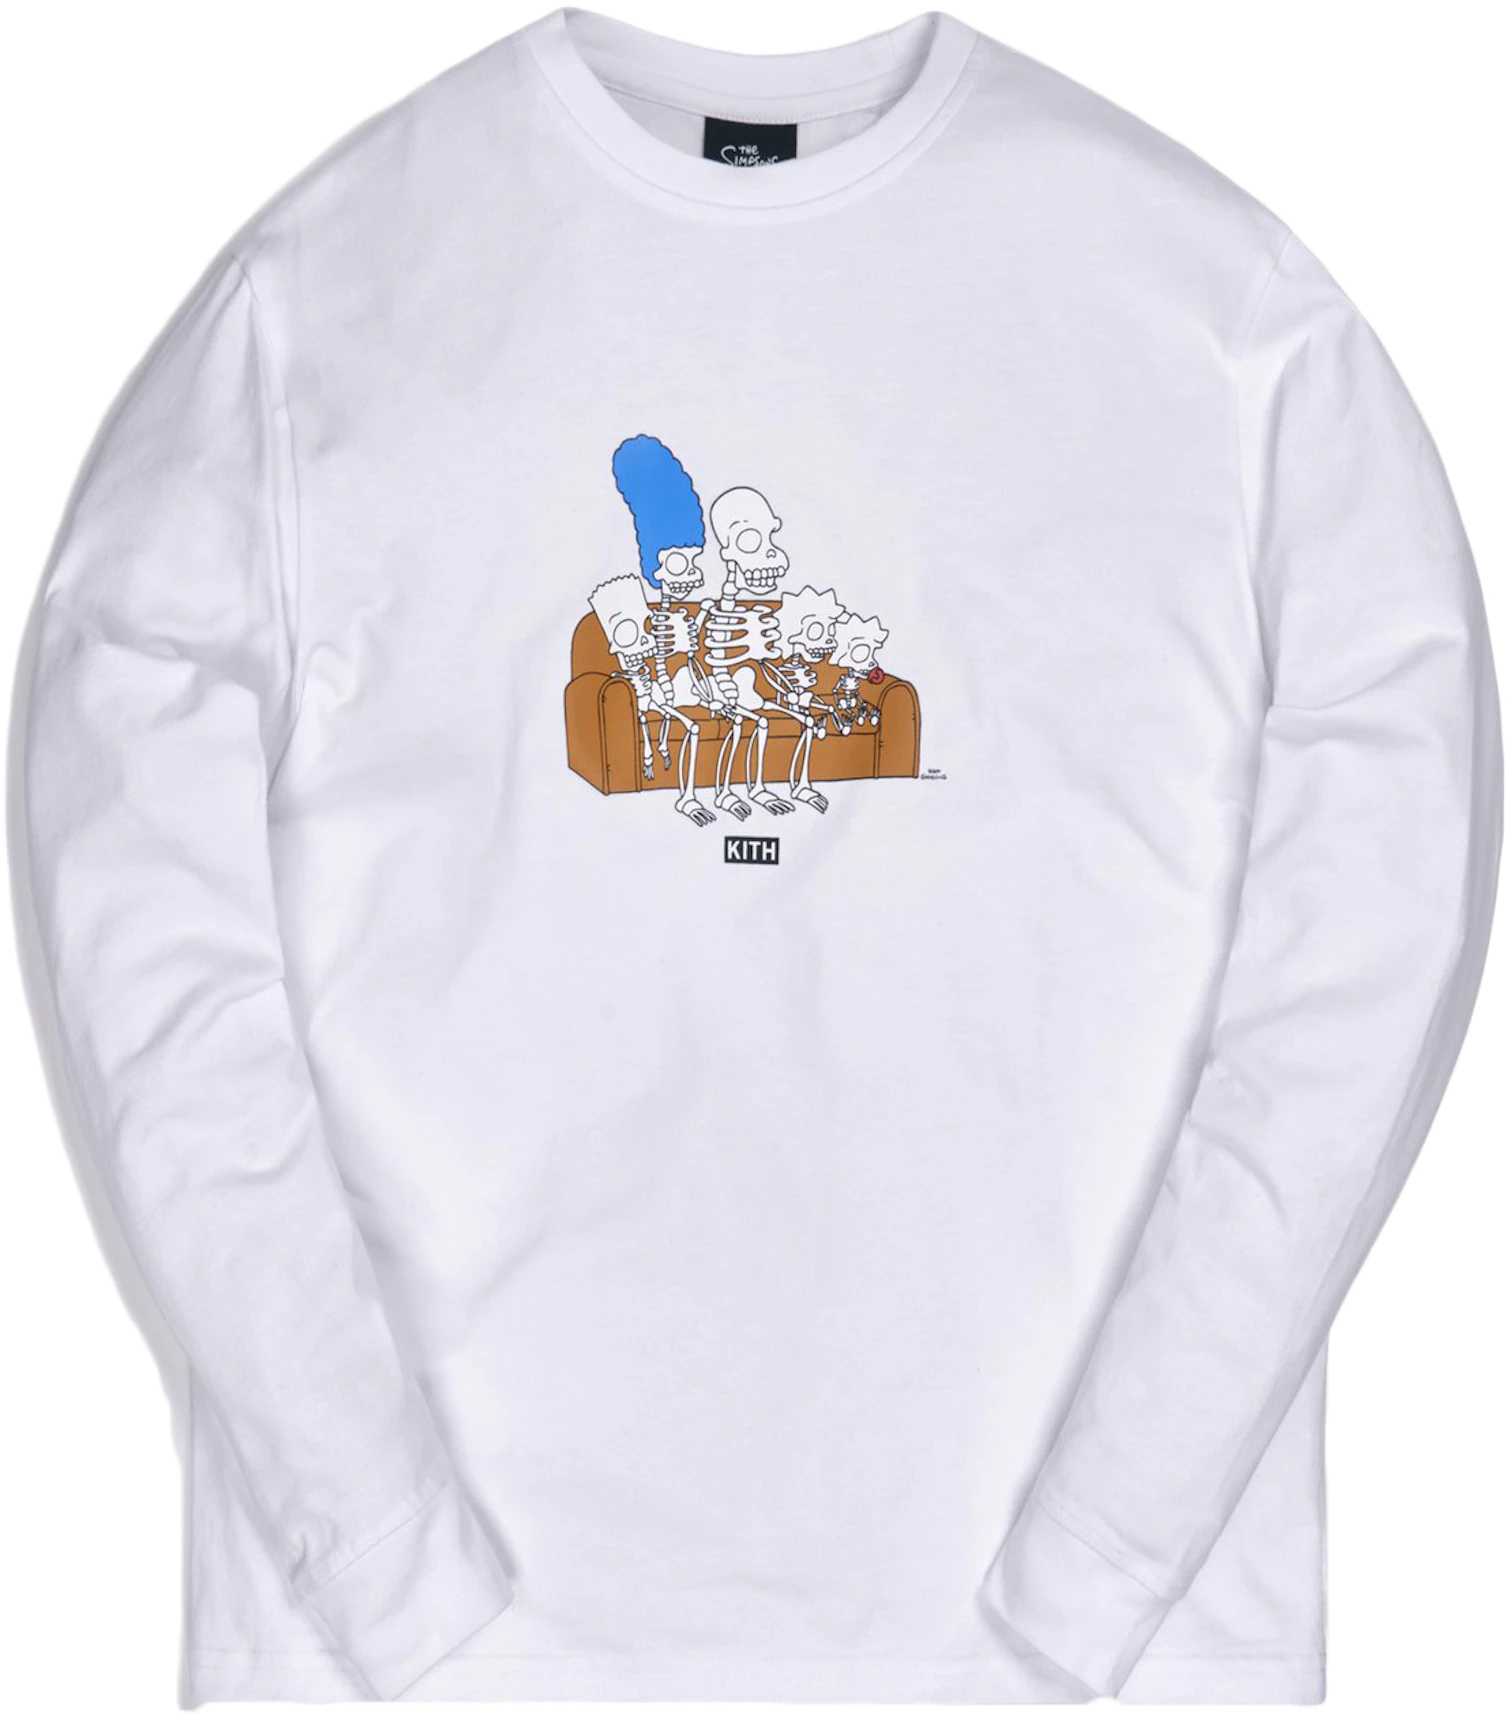 Kith x The Simpsons Couch L/S Tee White - SS21 - GB